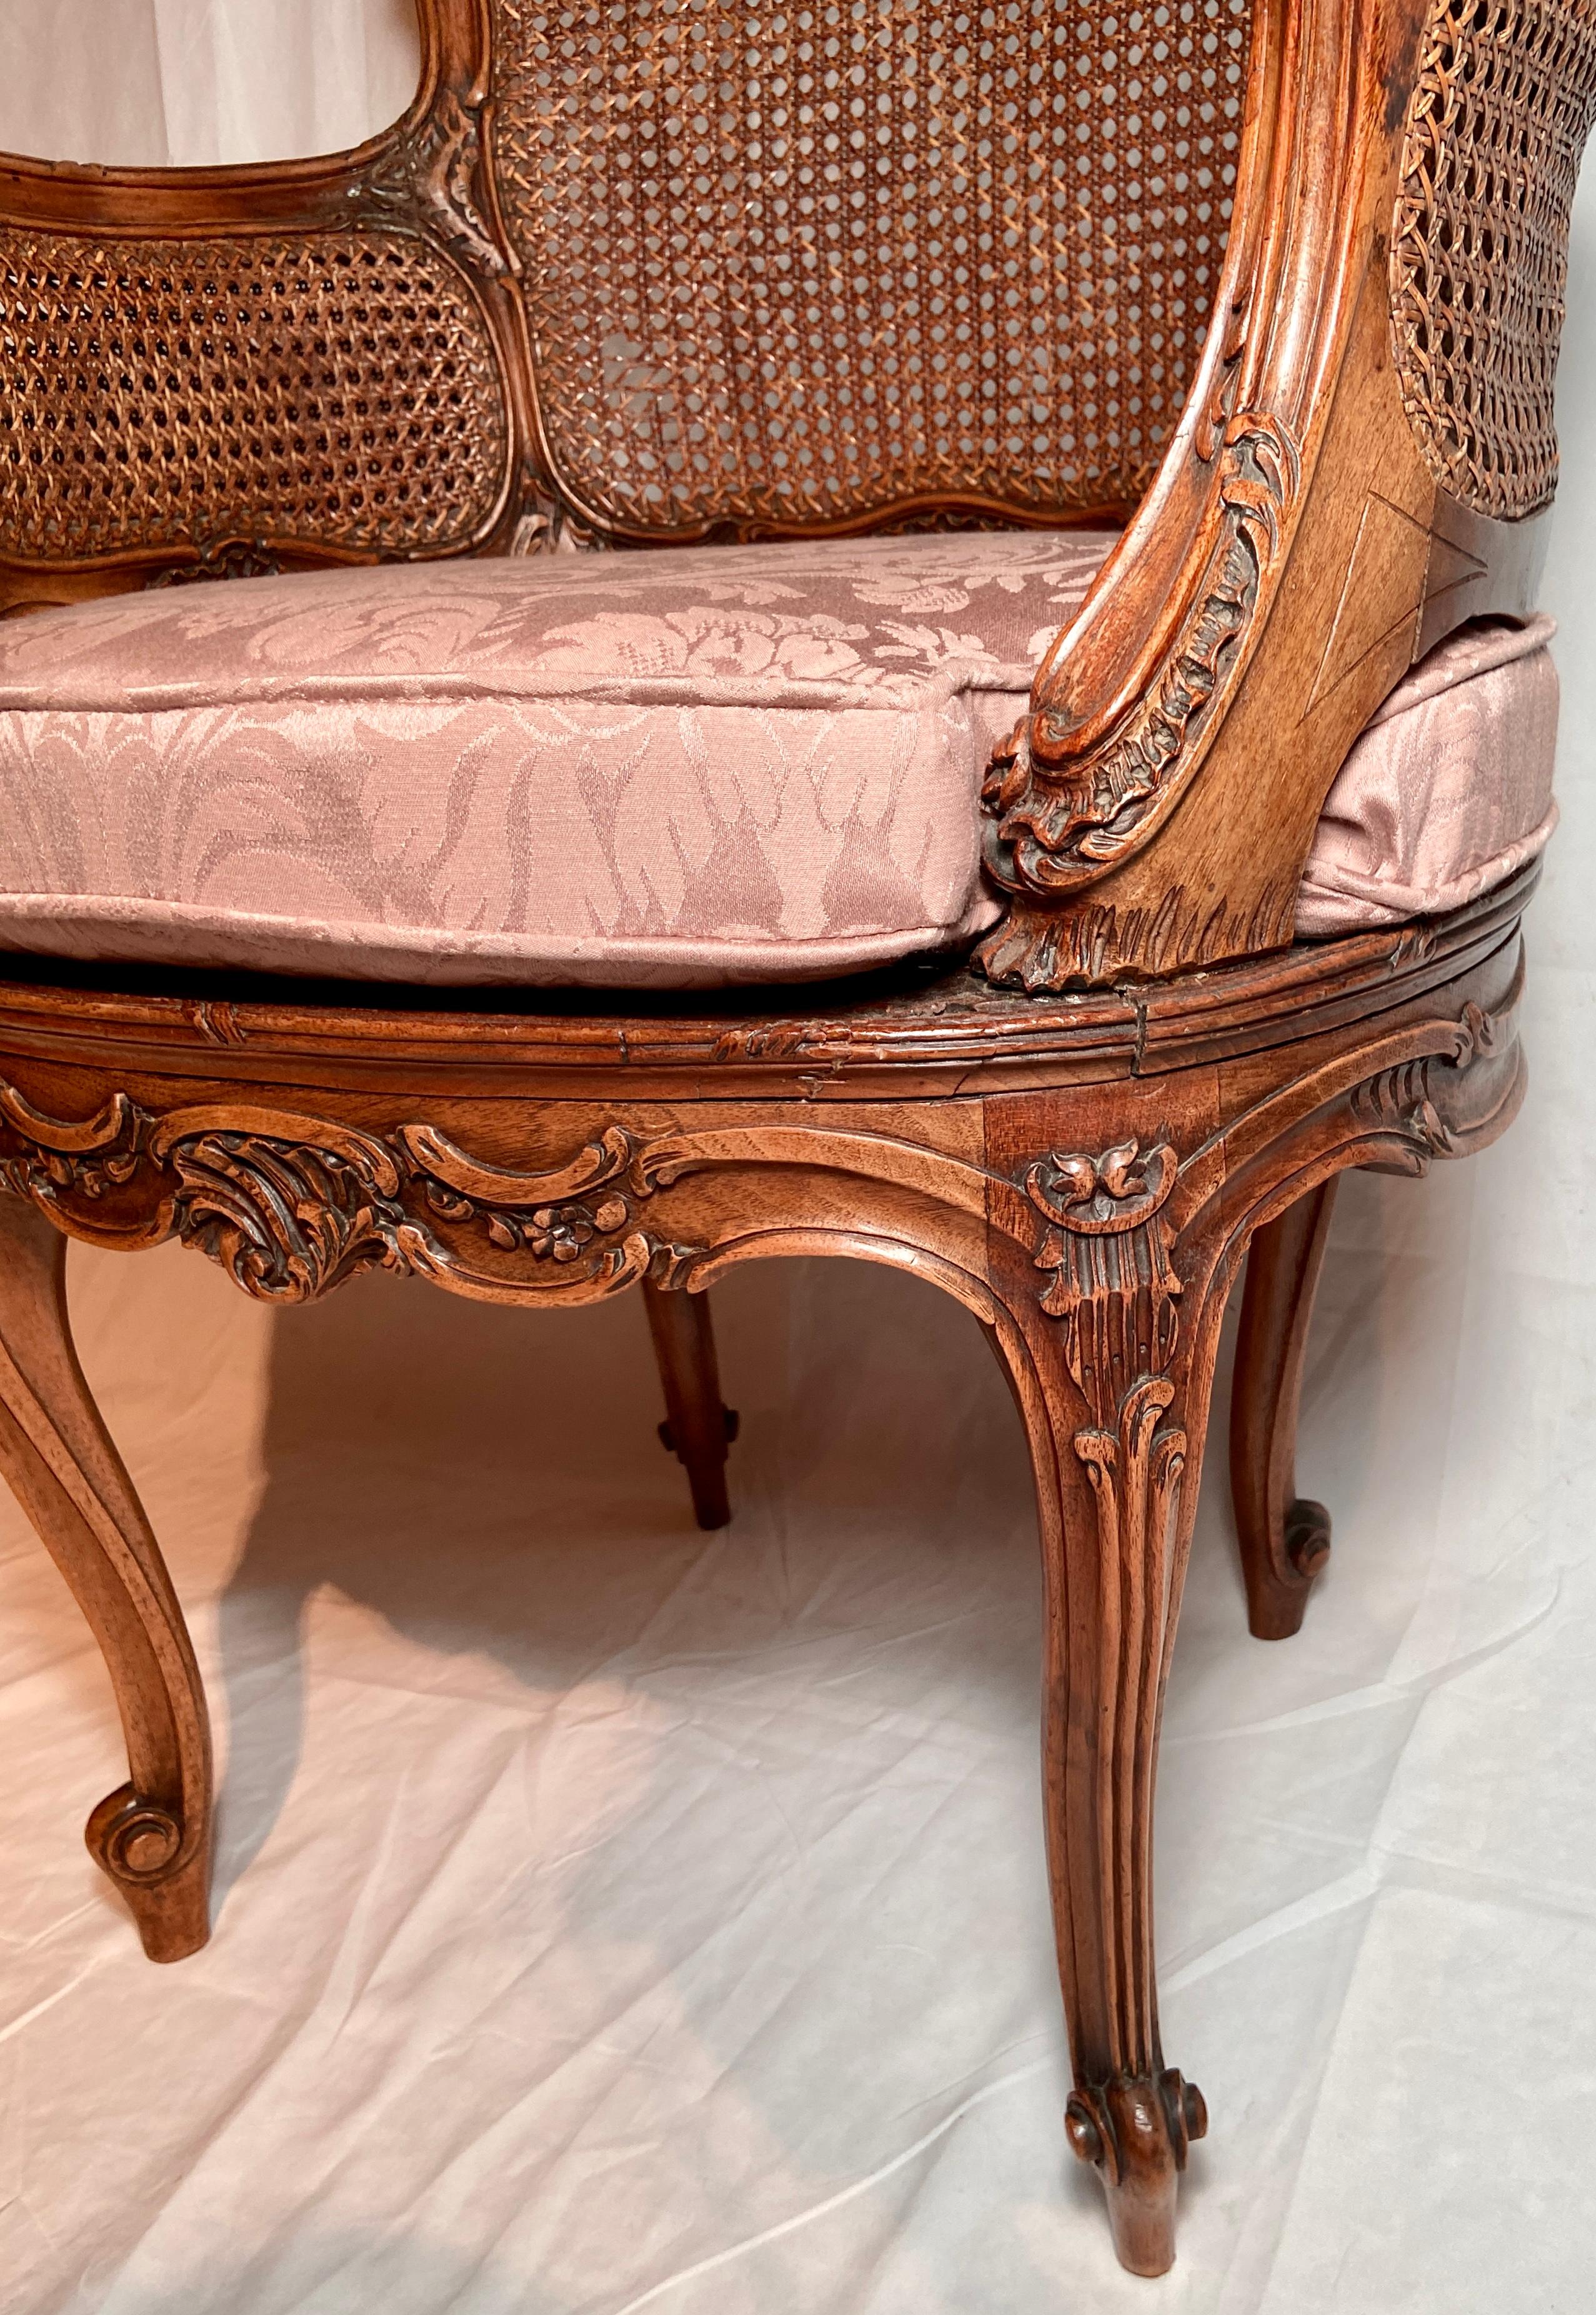 19th Century Pair Antique French Walnut & Cane Arm Chairs with Carved Backs, Circa 1890s For Sale